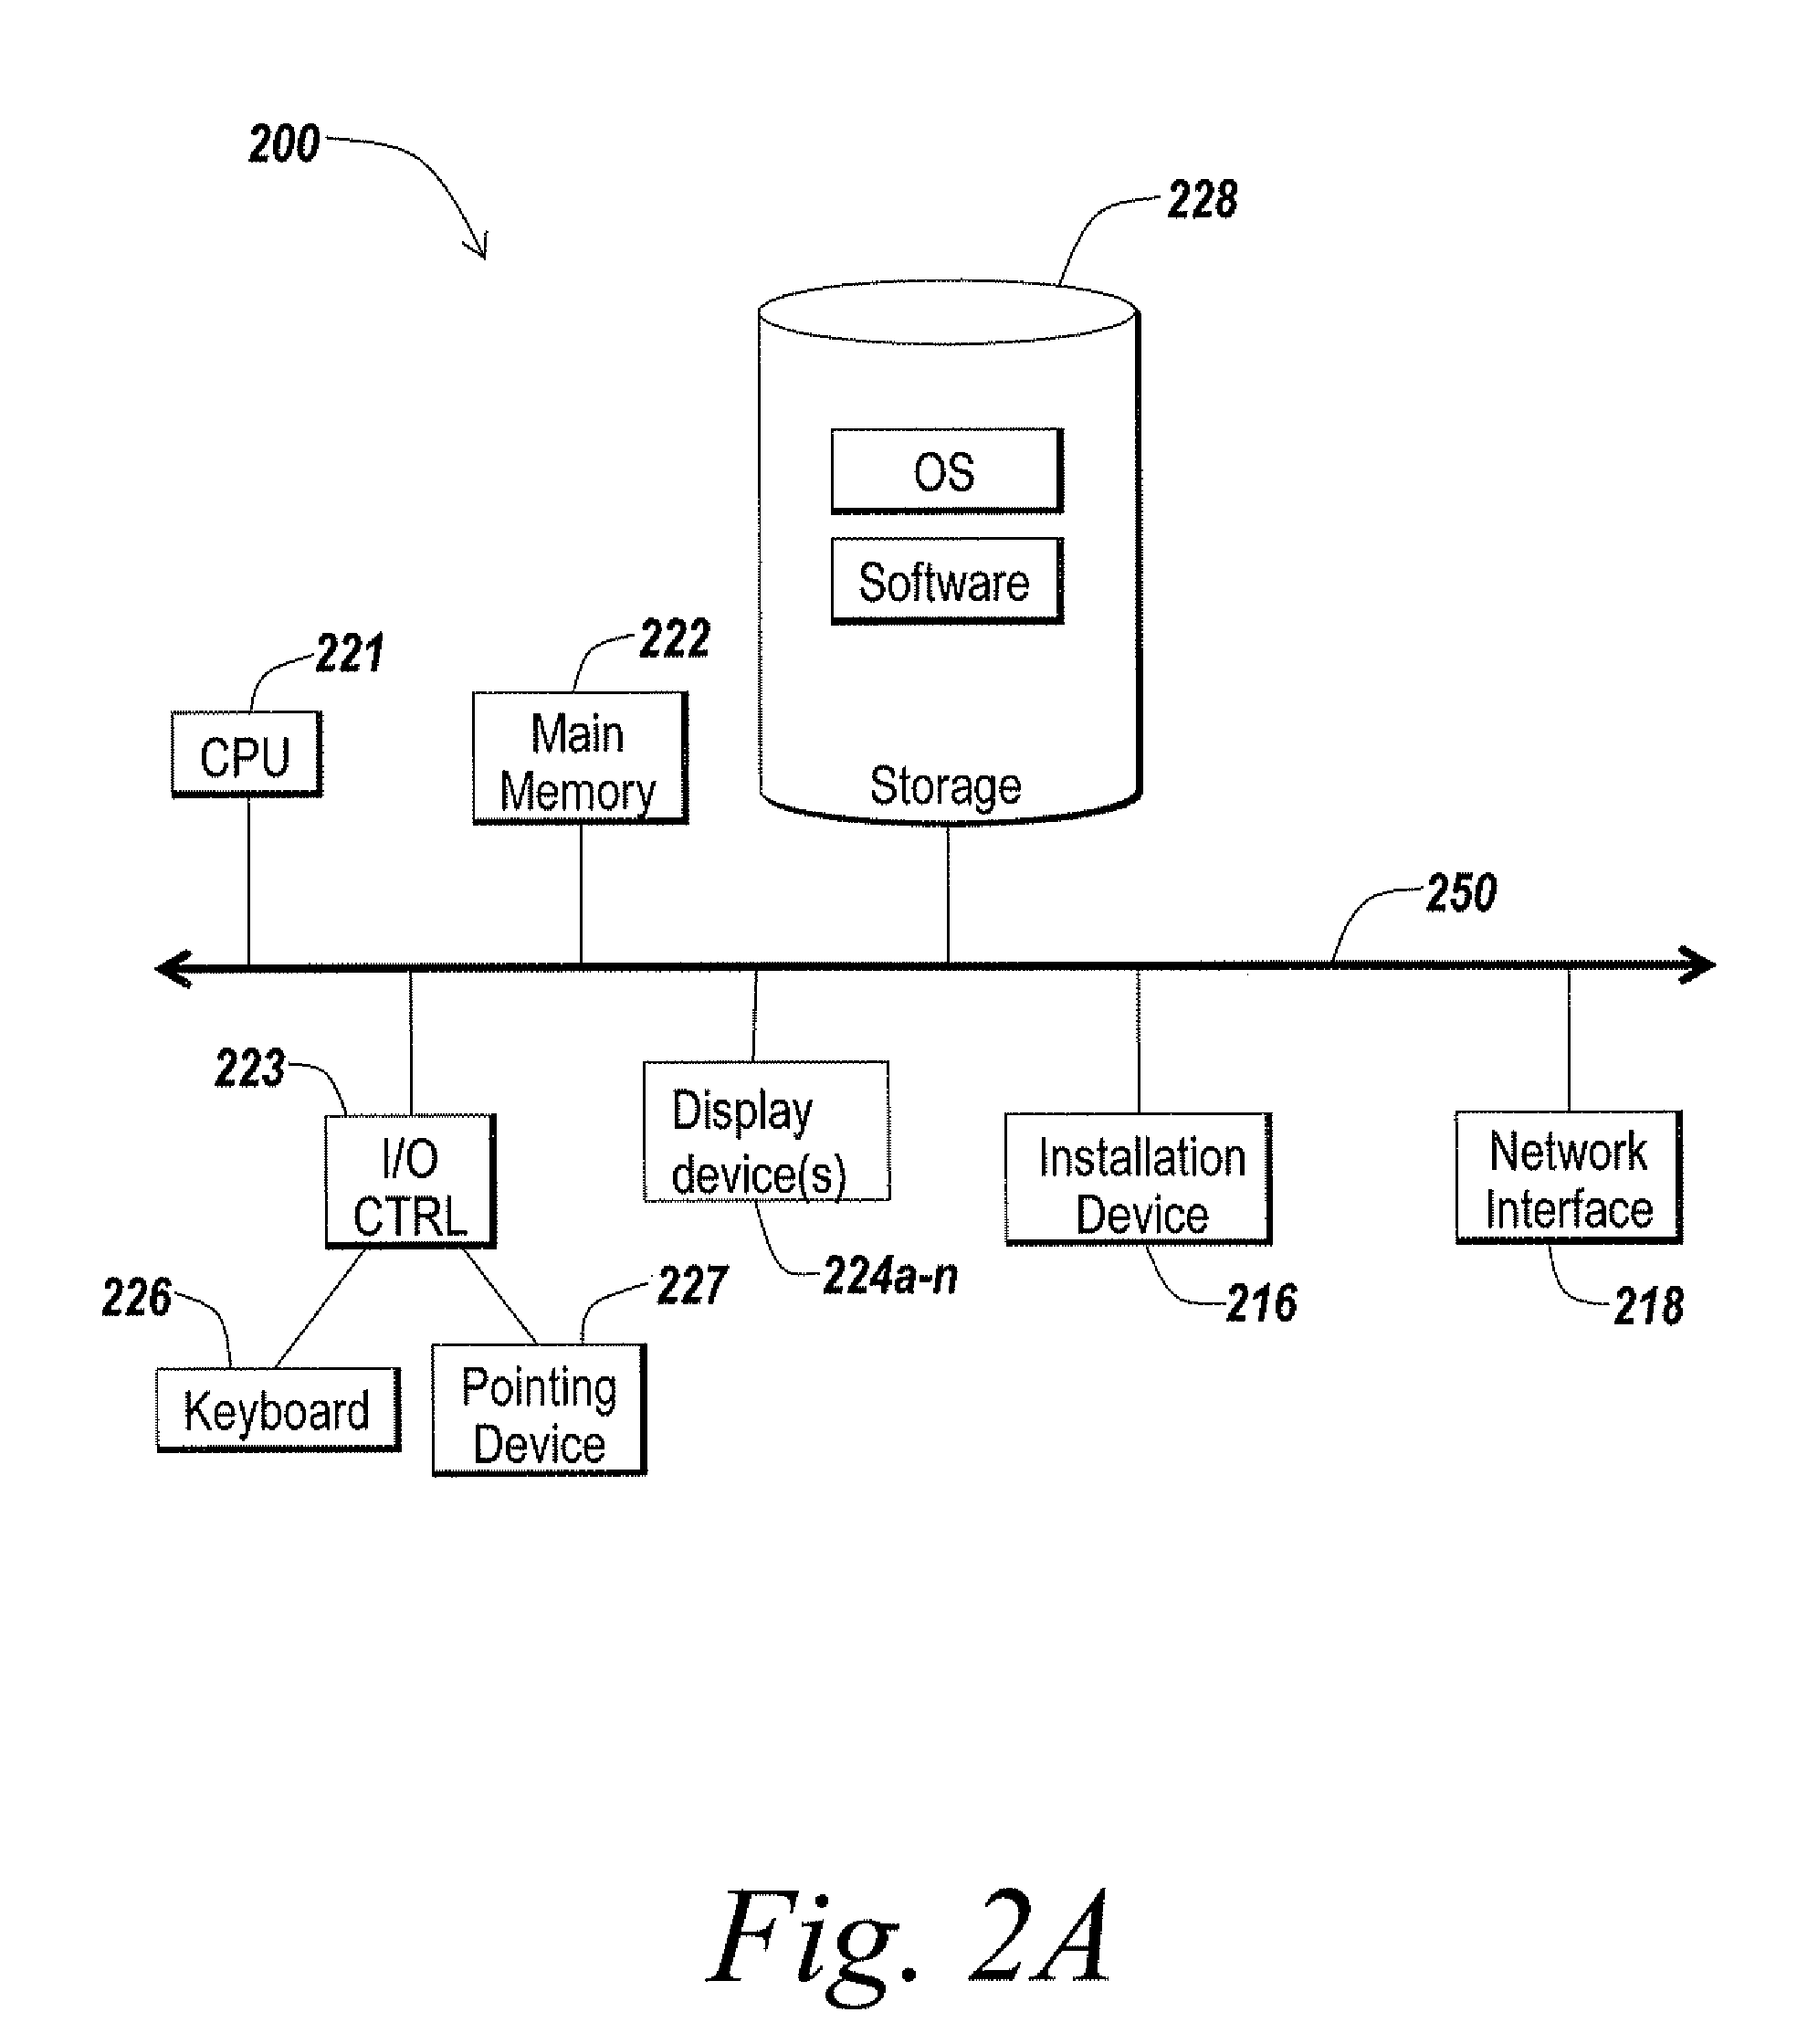 Systems and methods for displayng to a presenter visual feedback corresponding to visual changes received by viewers